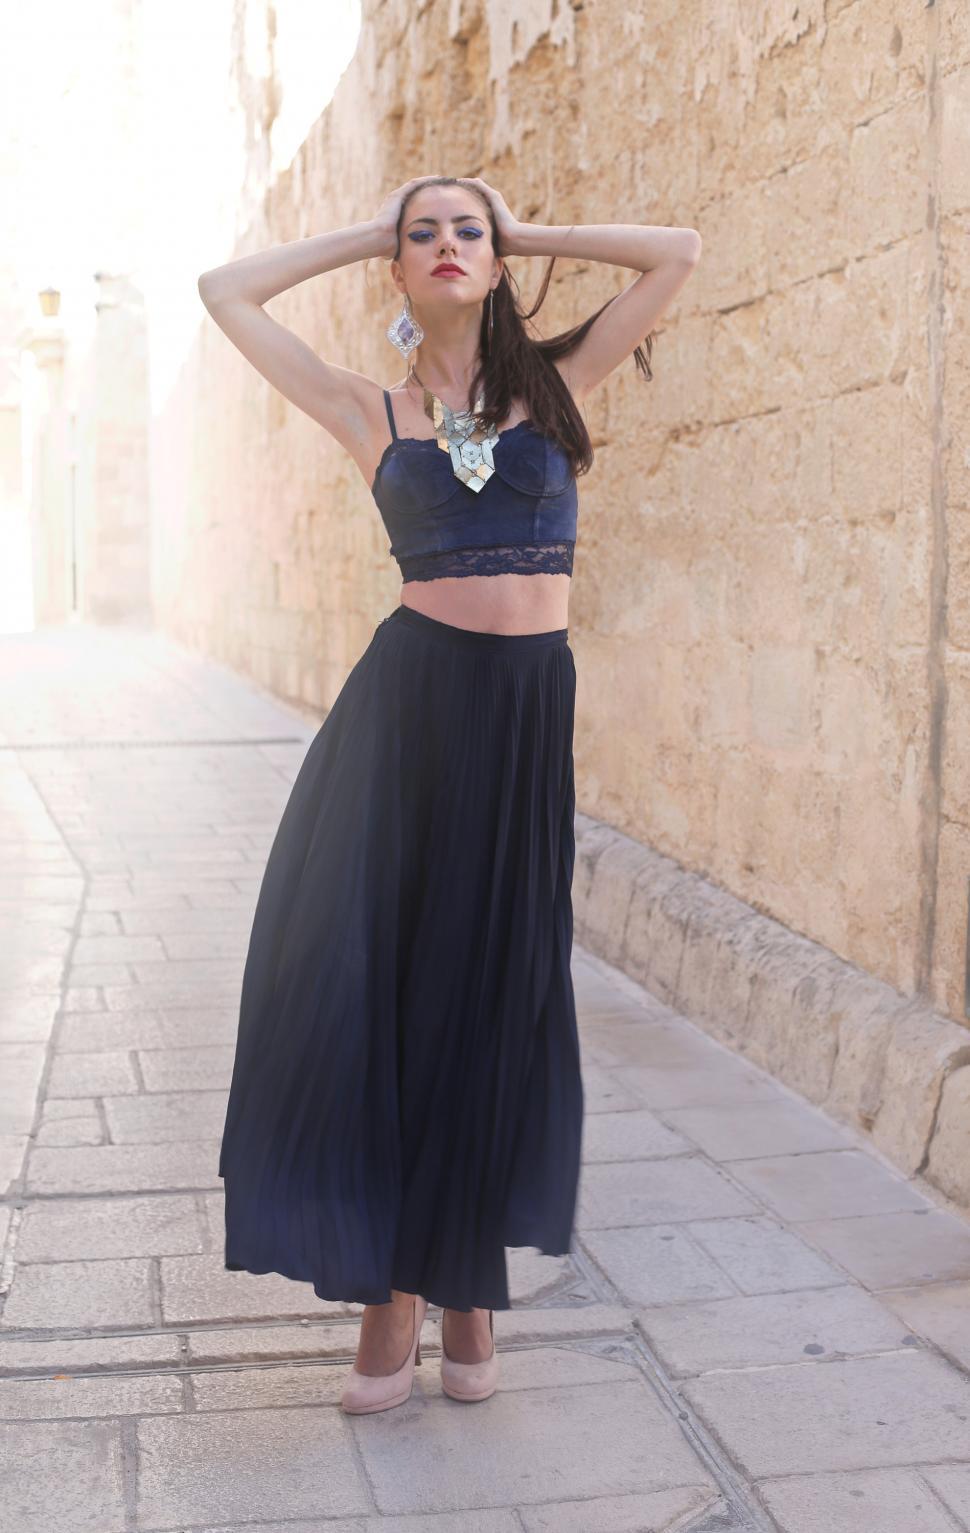 Free Image of Young Female Fashion Model Posing In Black Long Skirt With Vinta 